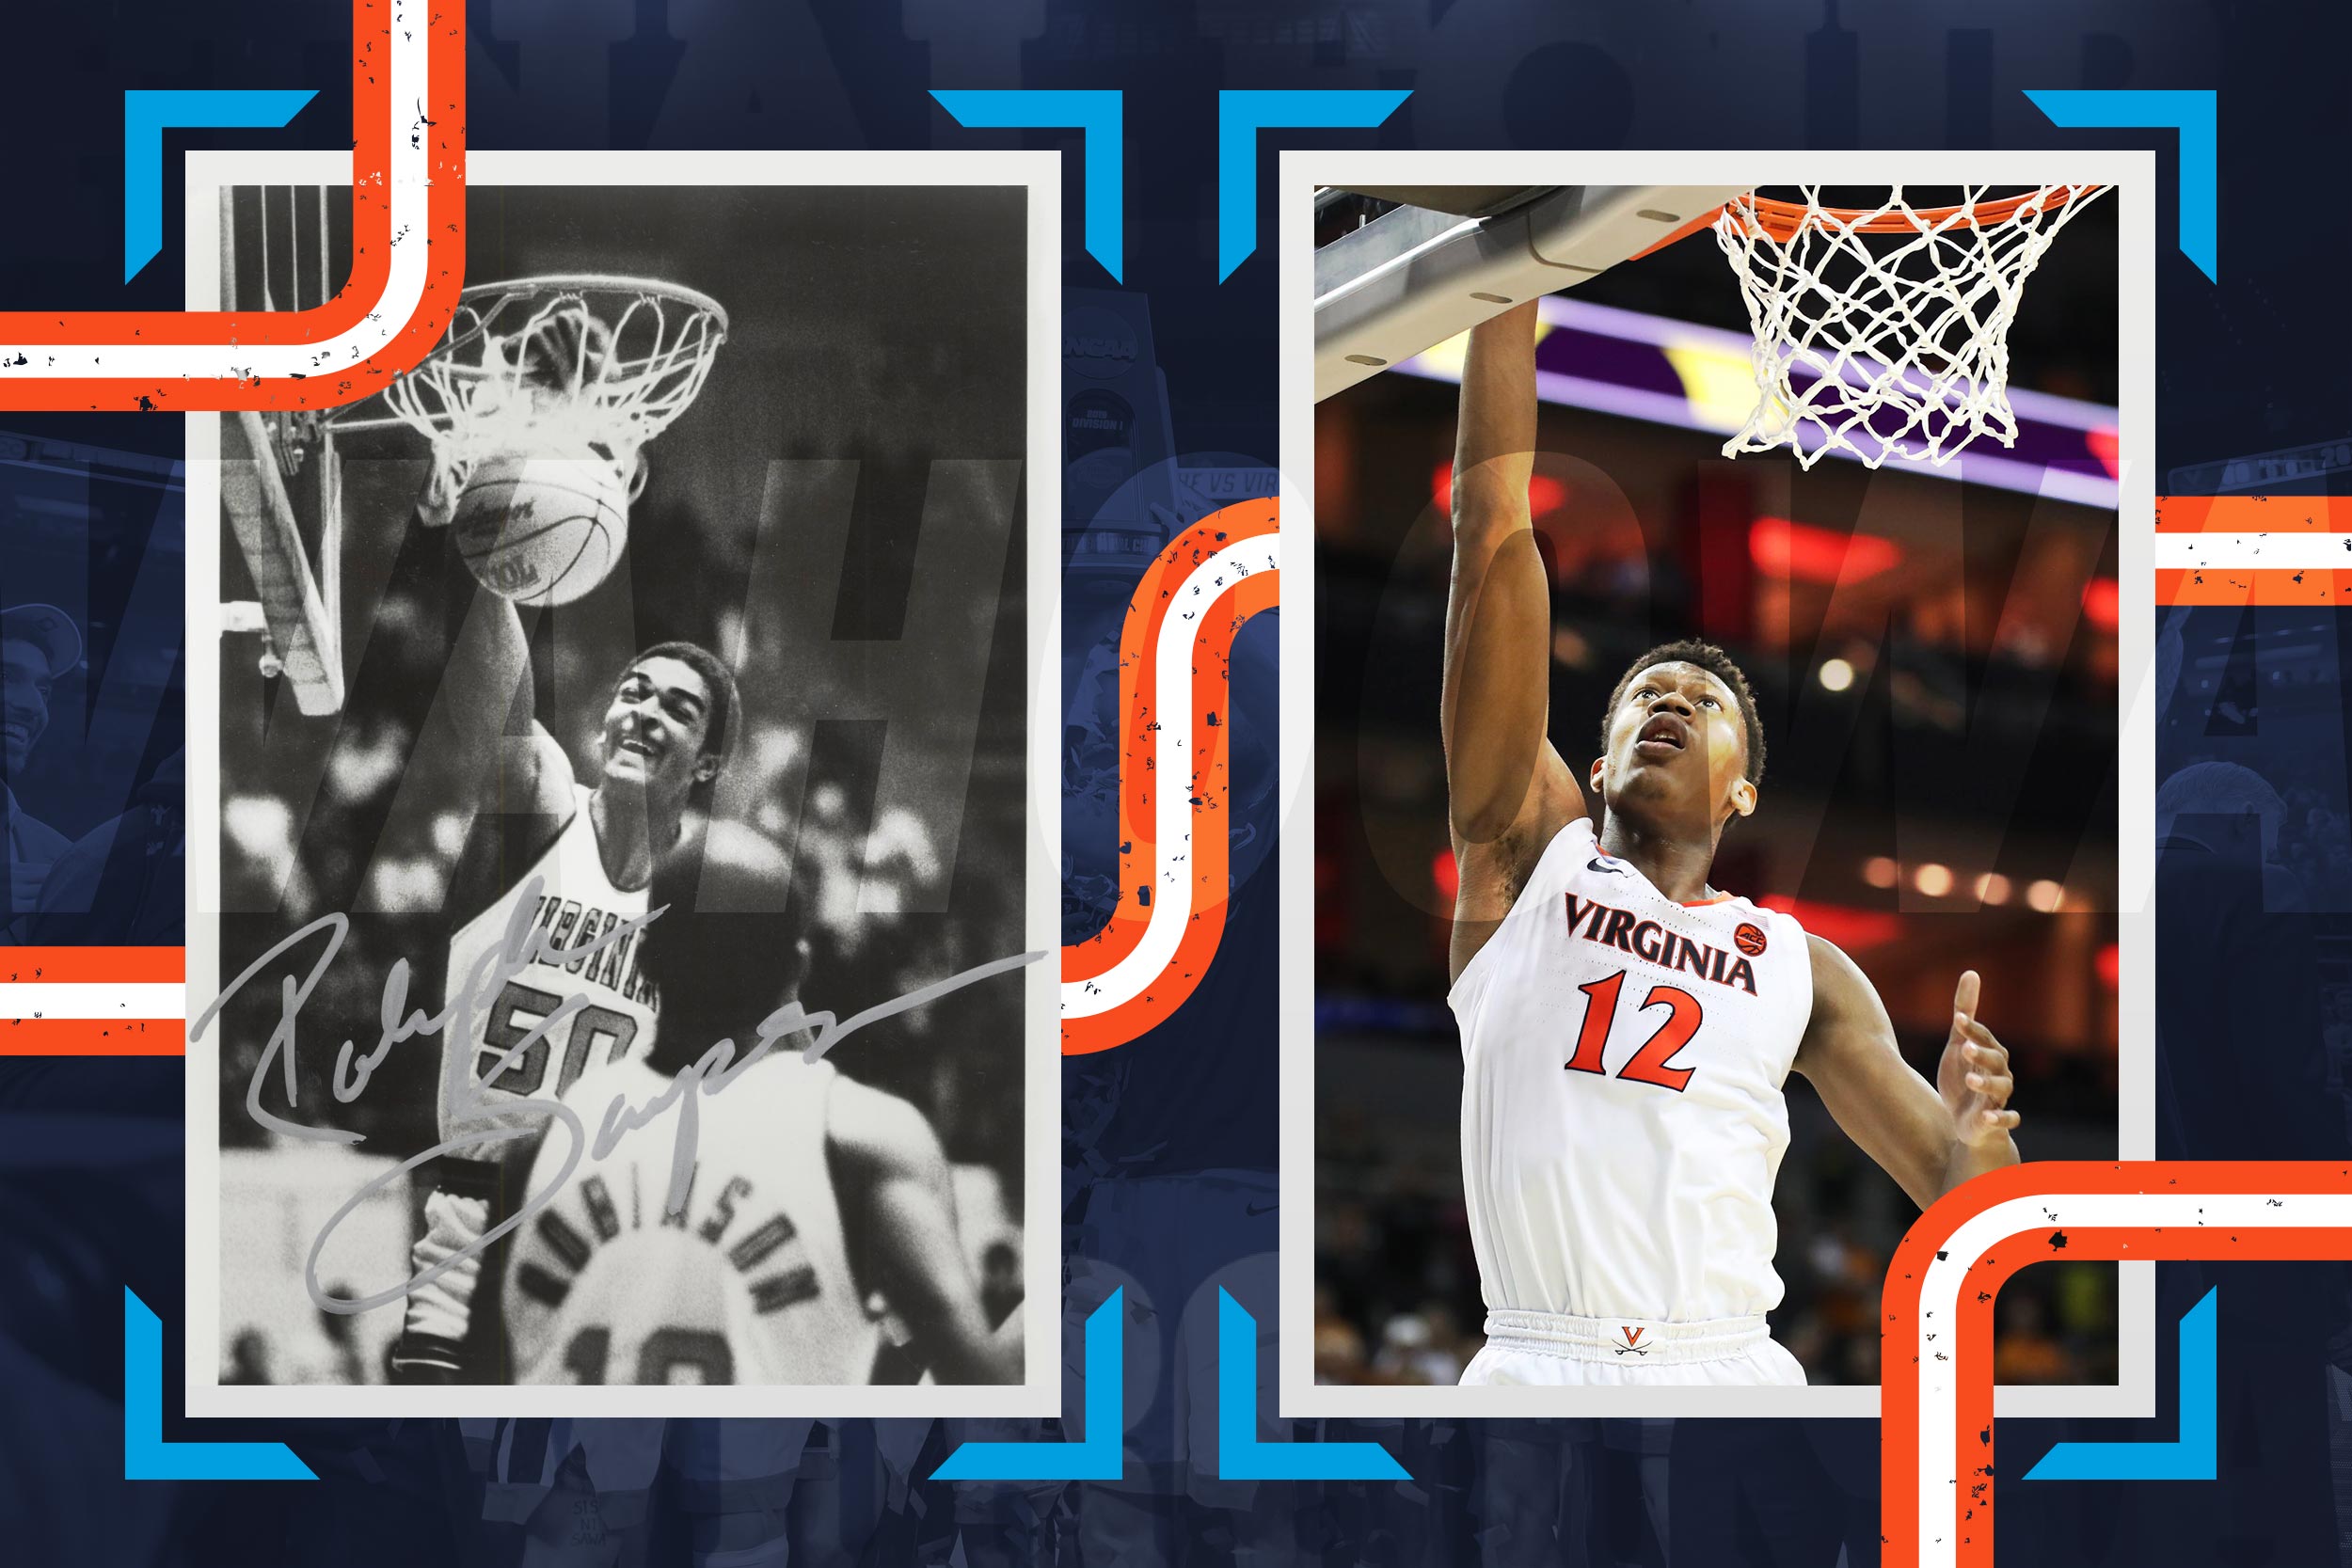 Left: Ralph Sampson dunking the ball Right: DeAndre Hunter doing a layup during a game